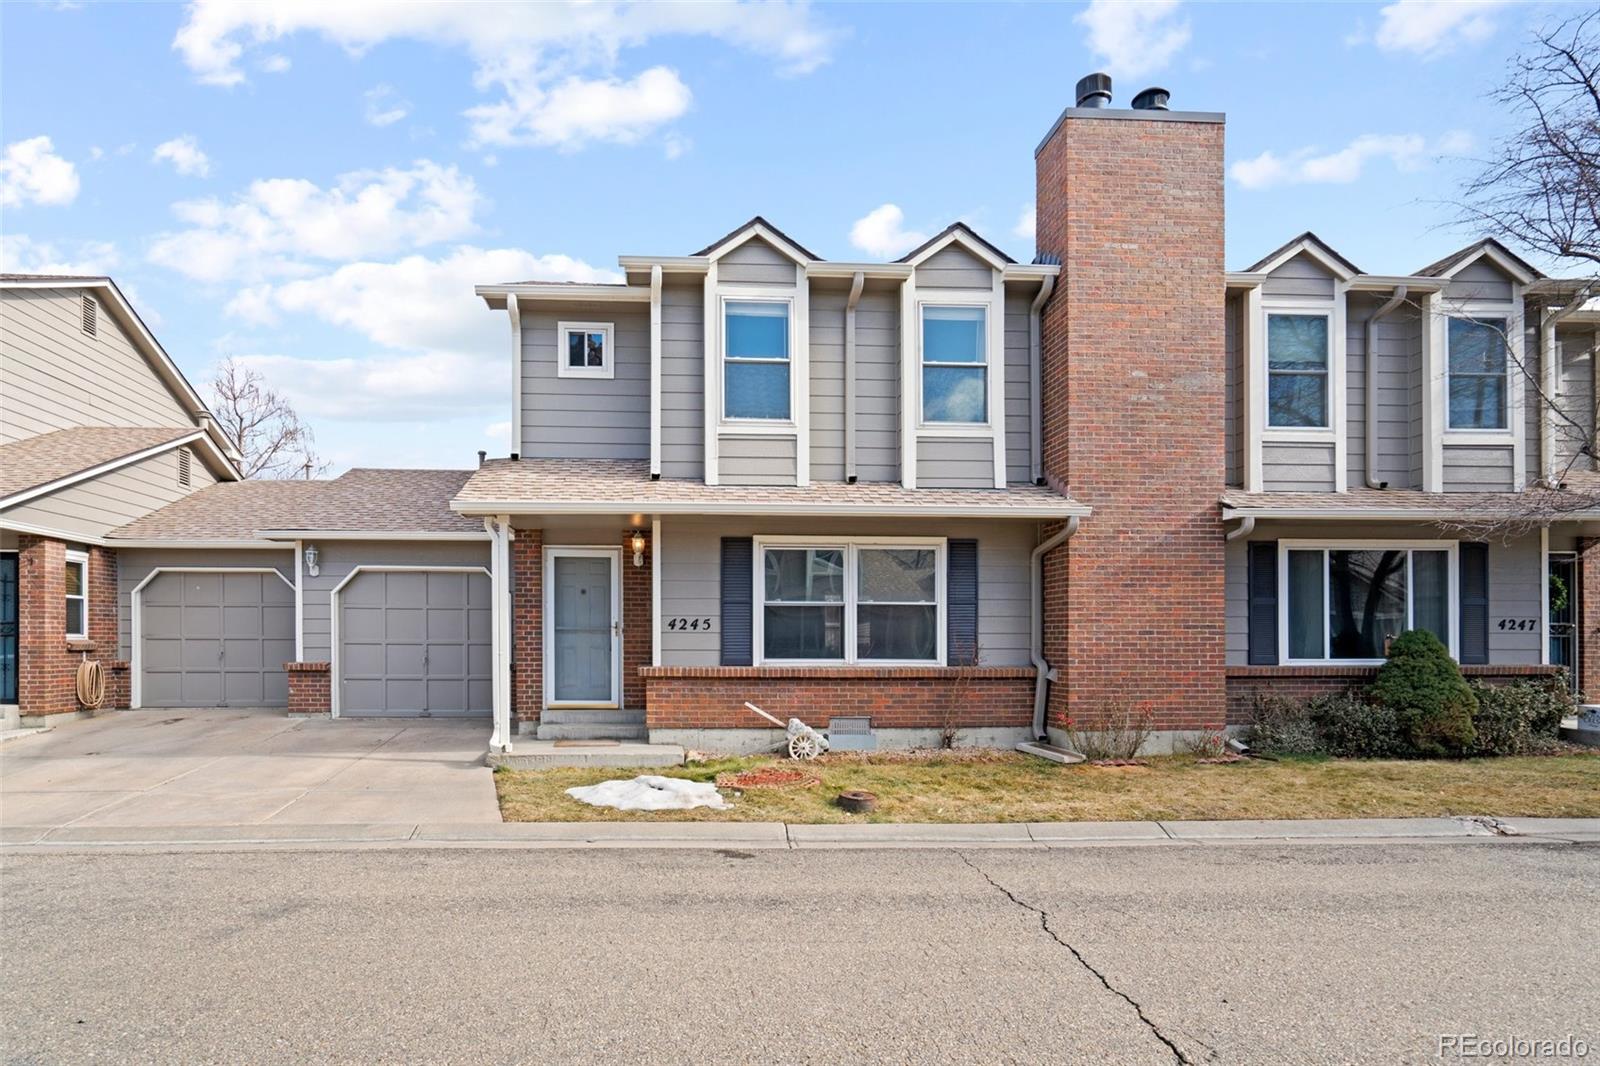 4245 111th, Westminster, CO